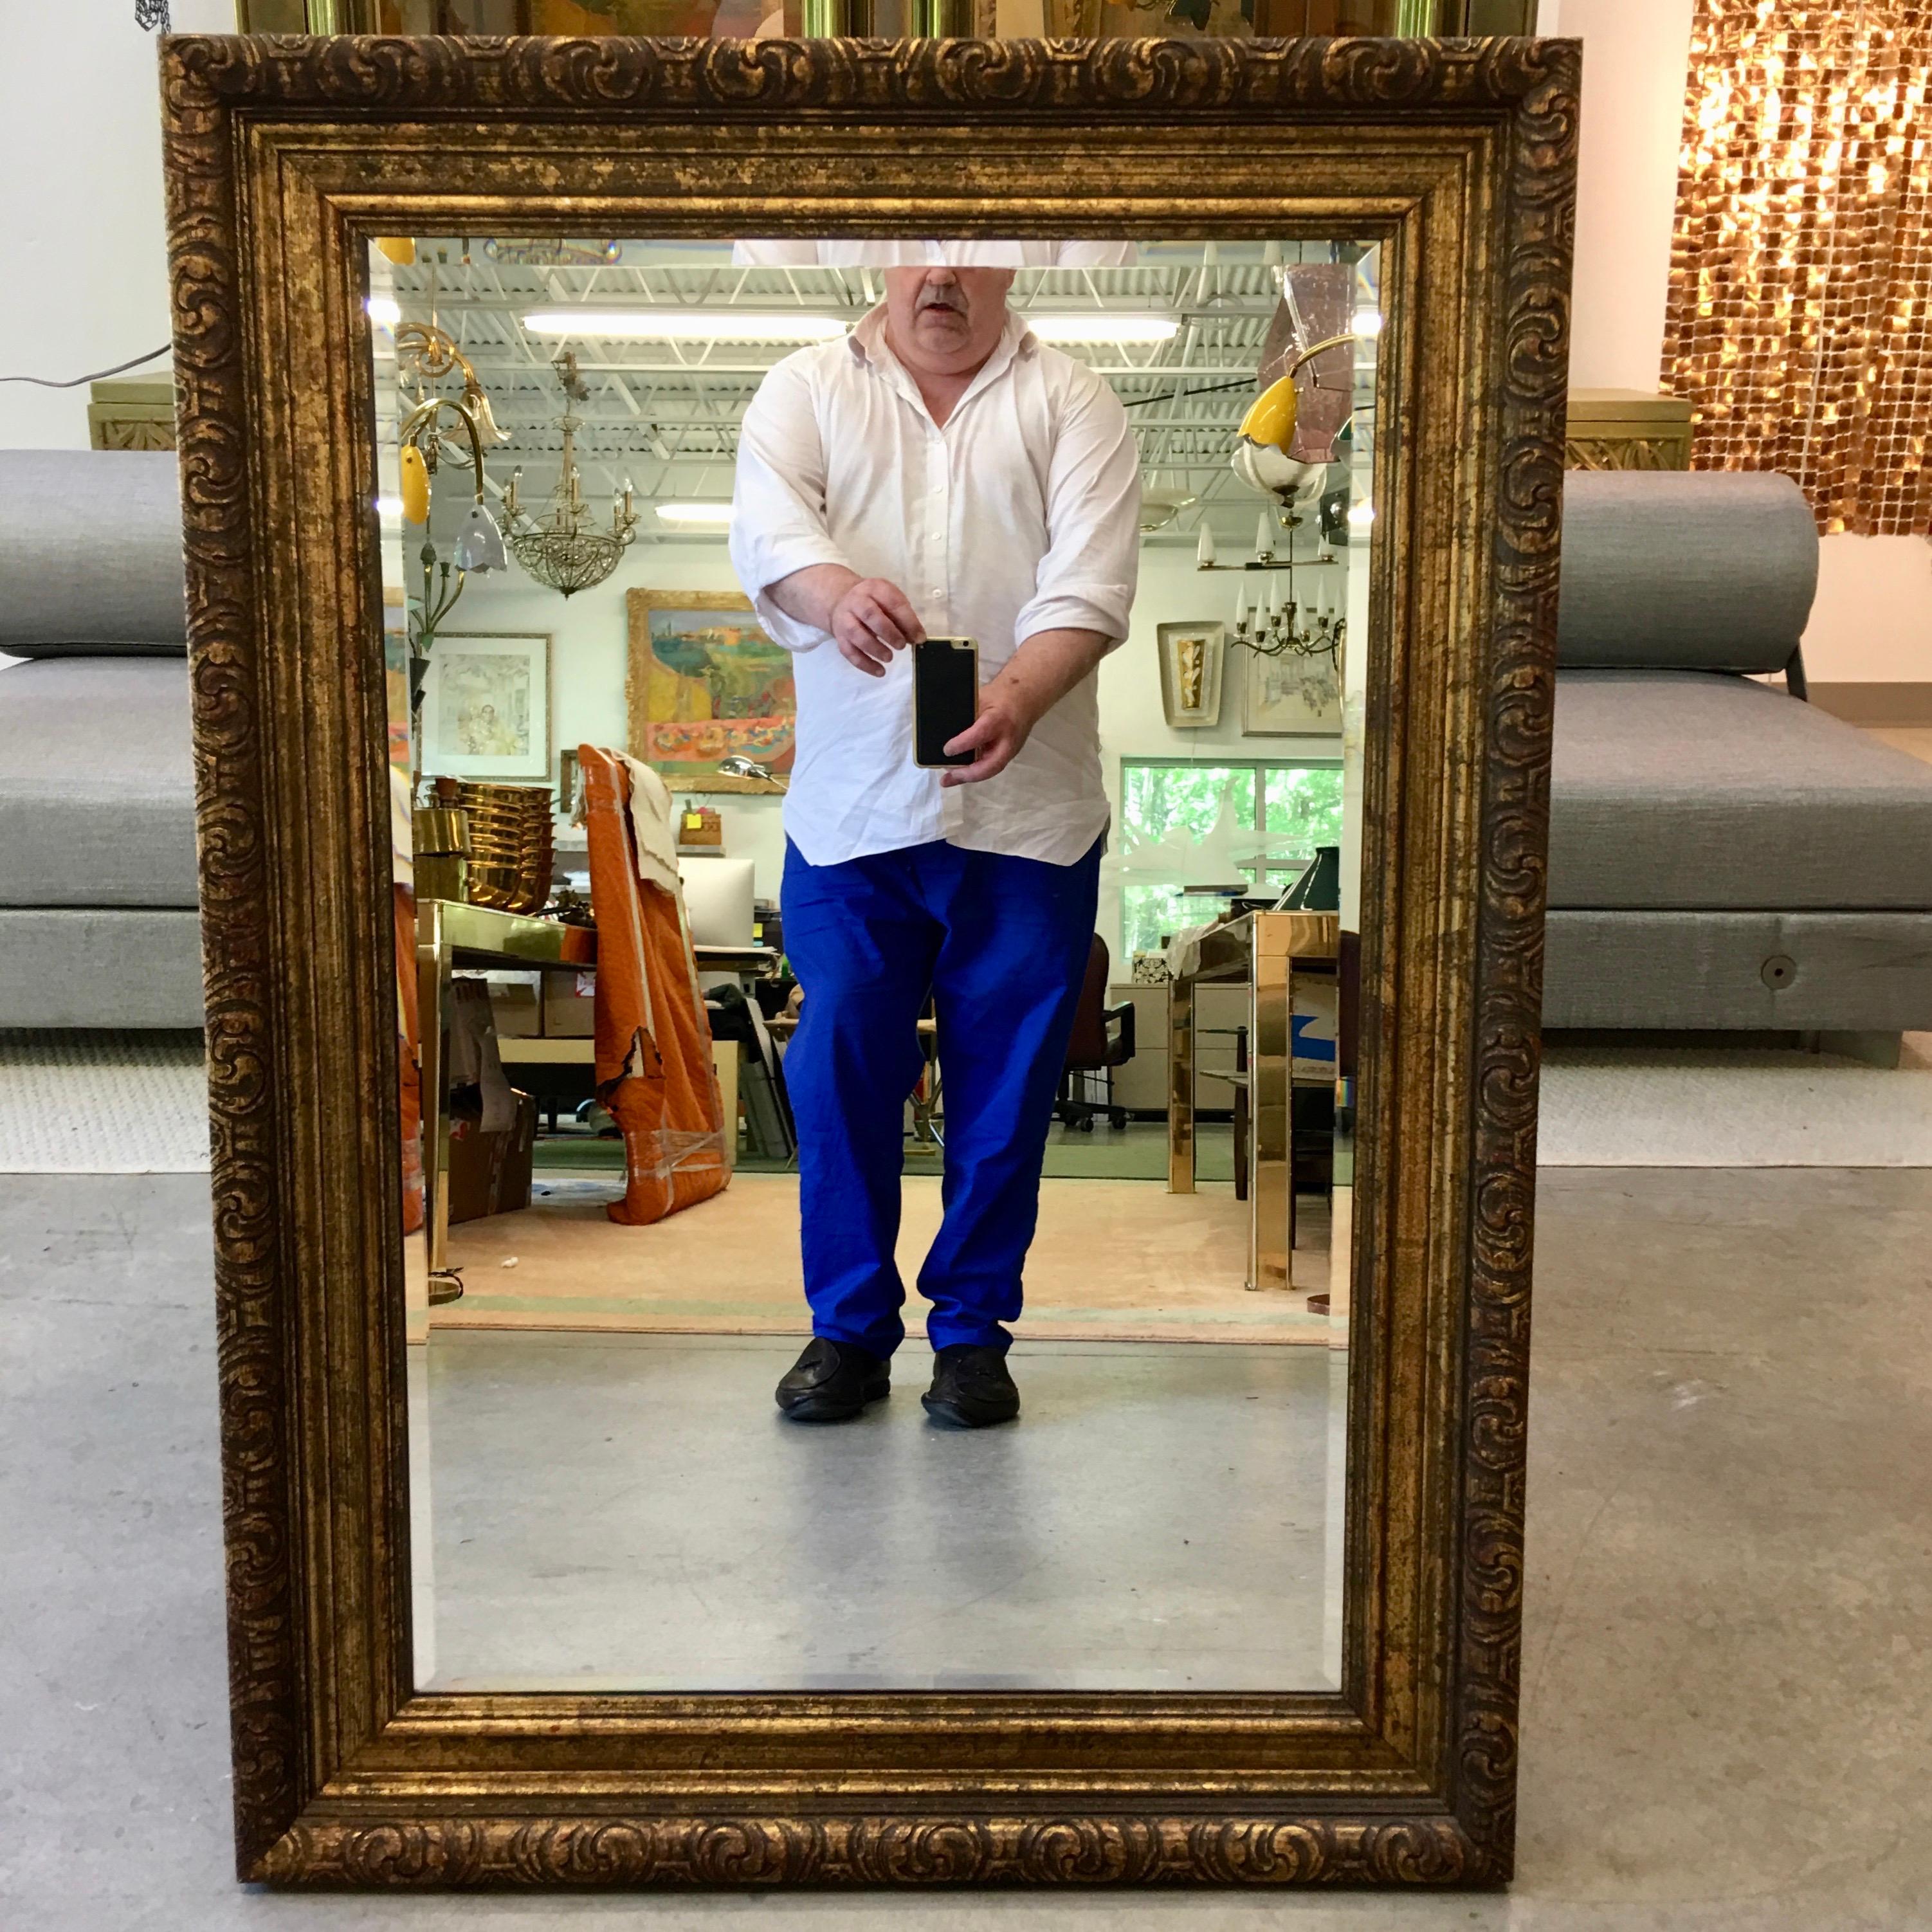 La Barge rectangular beveled mirror in carved giltwood frame. High quality from a trusted name. Circa 1960. Frame dimensions 43.5 inches high by 31.5 inches wide by 2 inches deep. Mirrored glass dimensions 35.5 inches high by 23.5 inches wide.